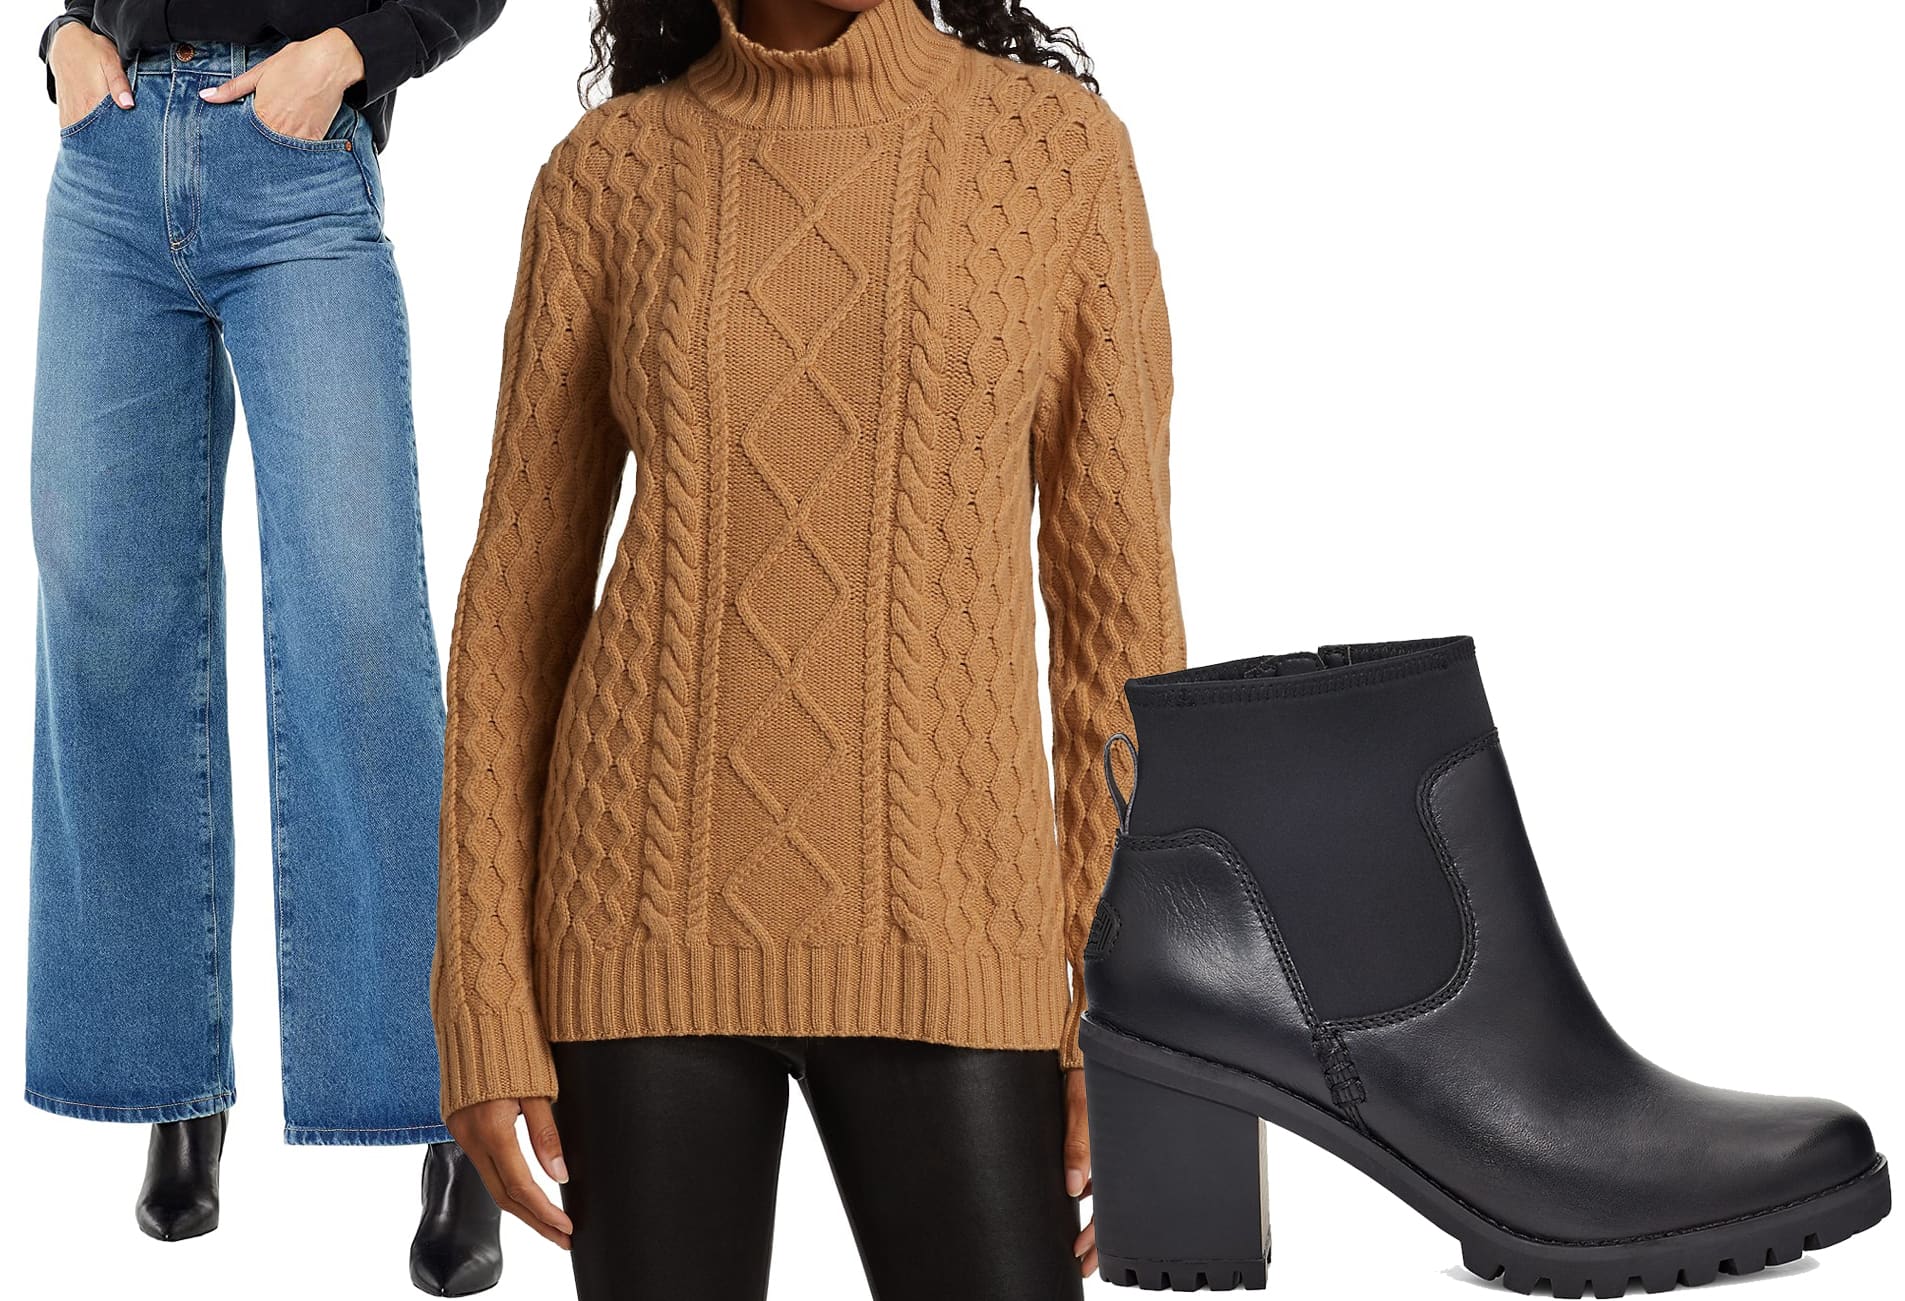 Cozy yet chic: AG Adriano Goldschmied high-rise ultra wide leg jeans paired with a plush Saks Fifth Avenue cable-knit wool-cashmere fisherman sweater and UGG waterproof leather boots for a stylish, weather-ready look